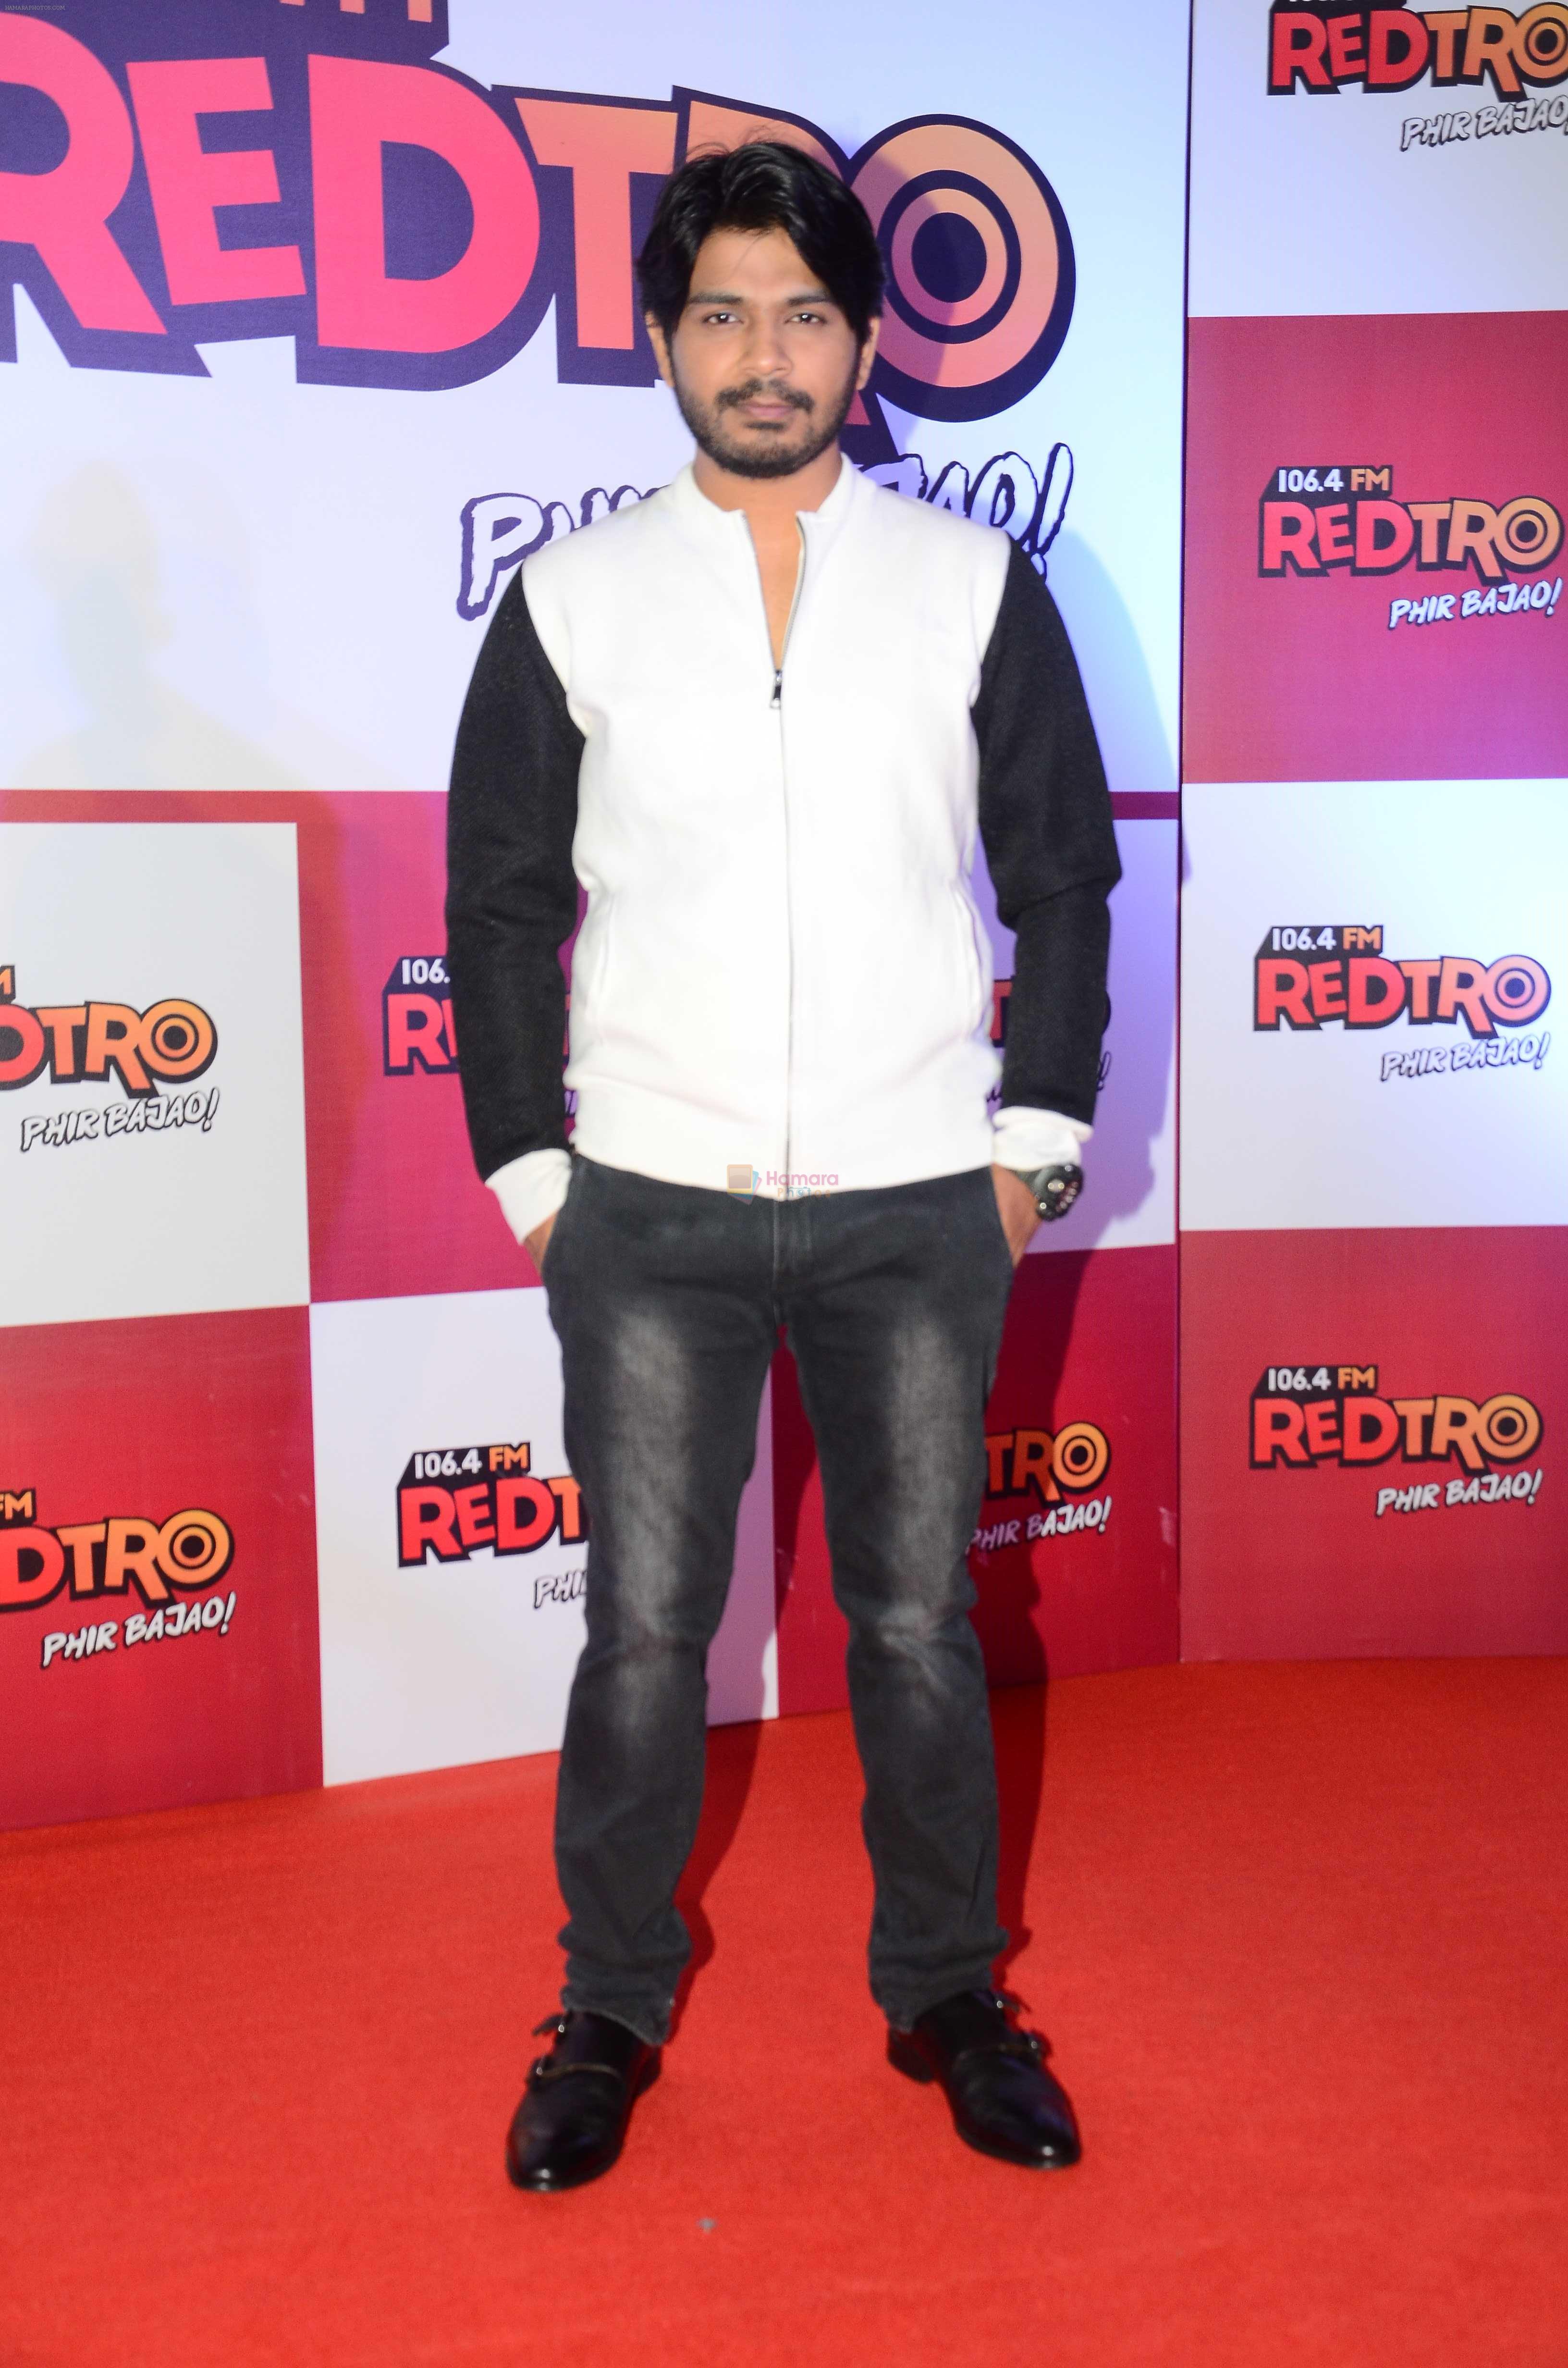 Ankit Tiwari during the party organised by Red FM to celebrate the launch of its new radio station Redtro 106.4 in Mumbai India on 22 July 2016